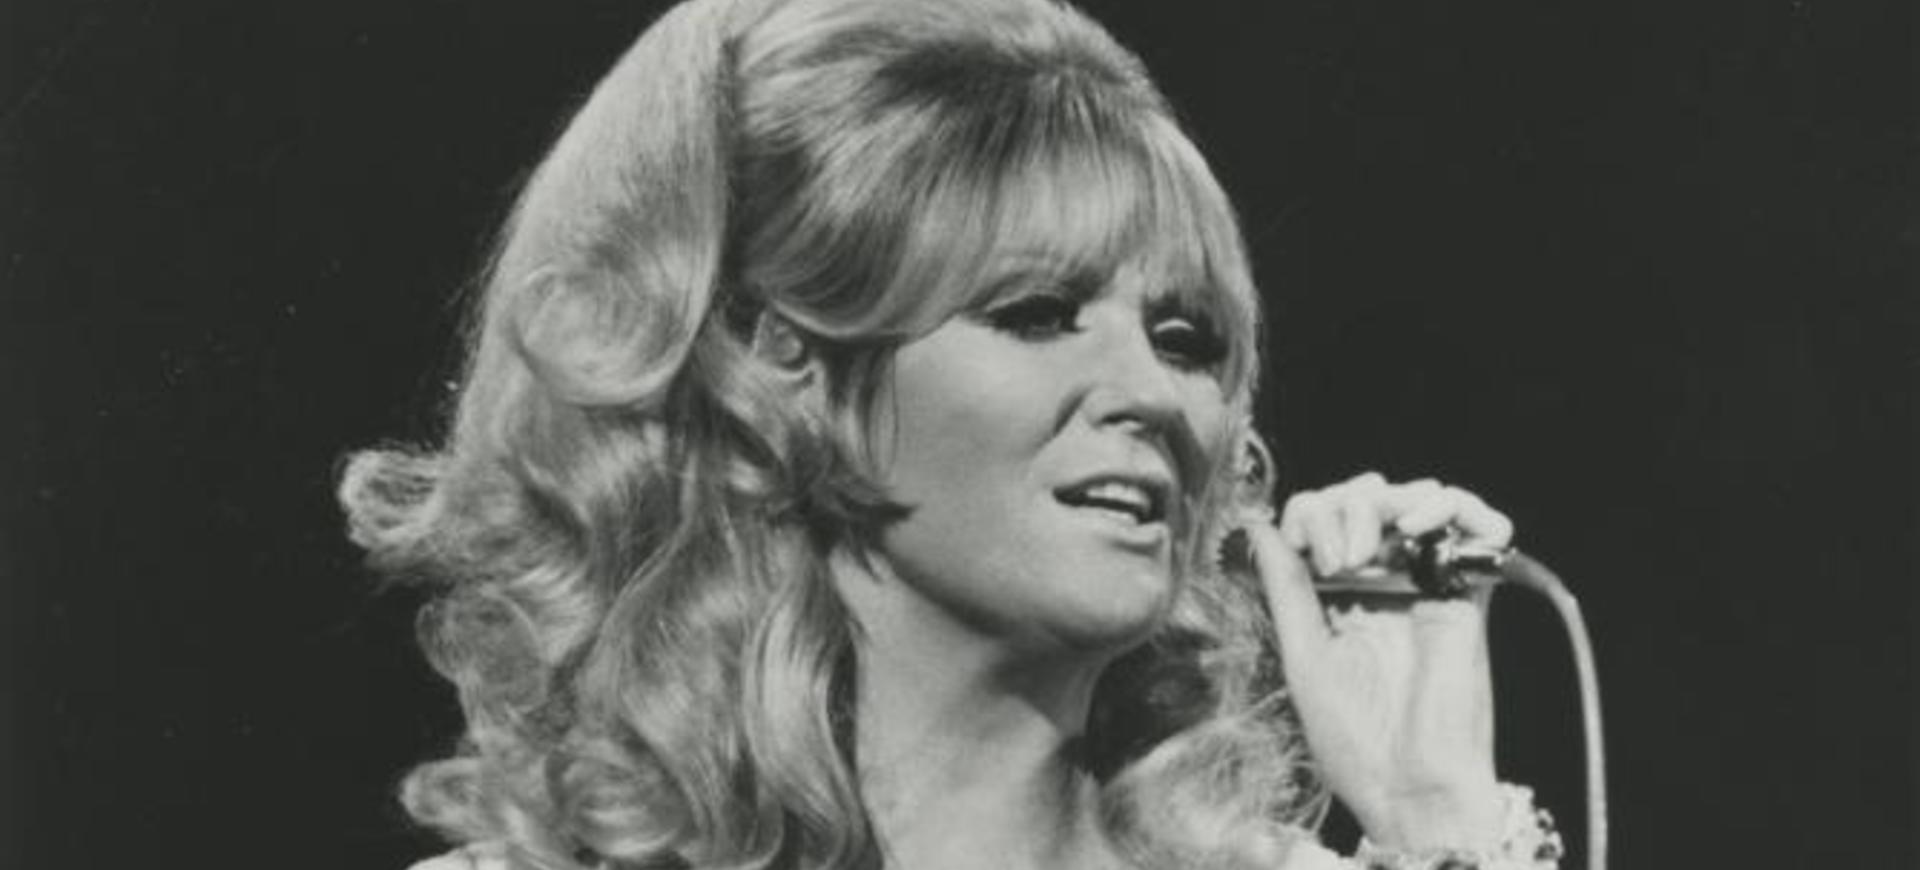 Dusty Springfield | Rock & Roll Hall of Fame